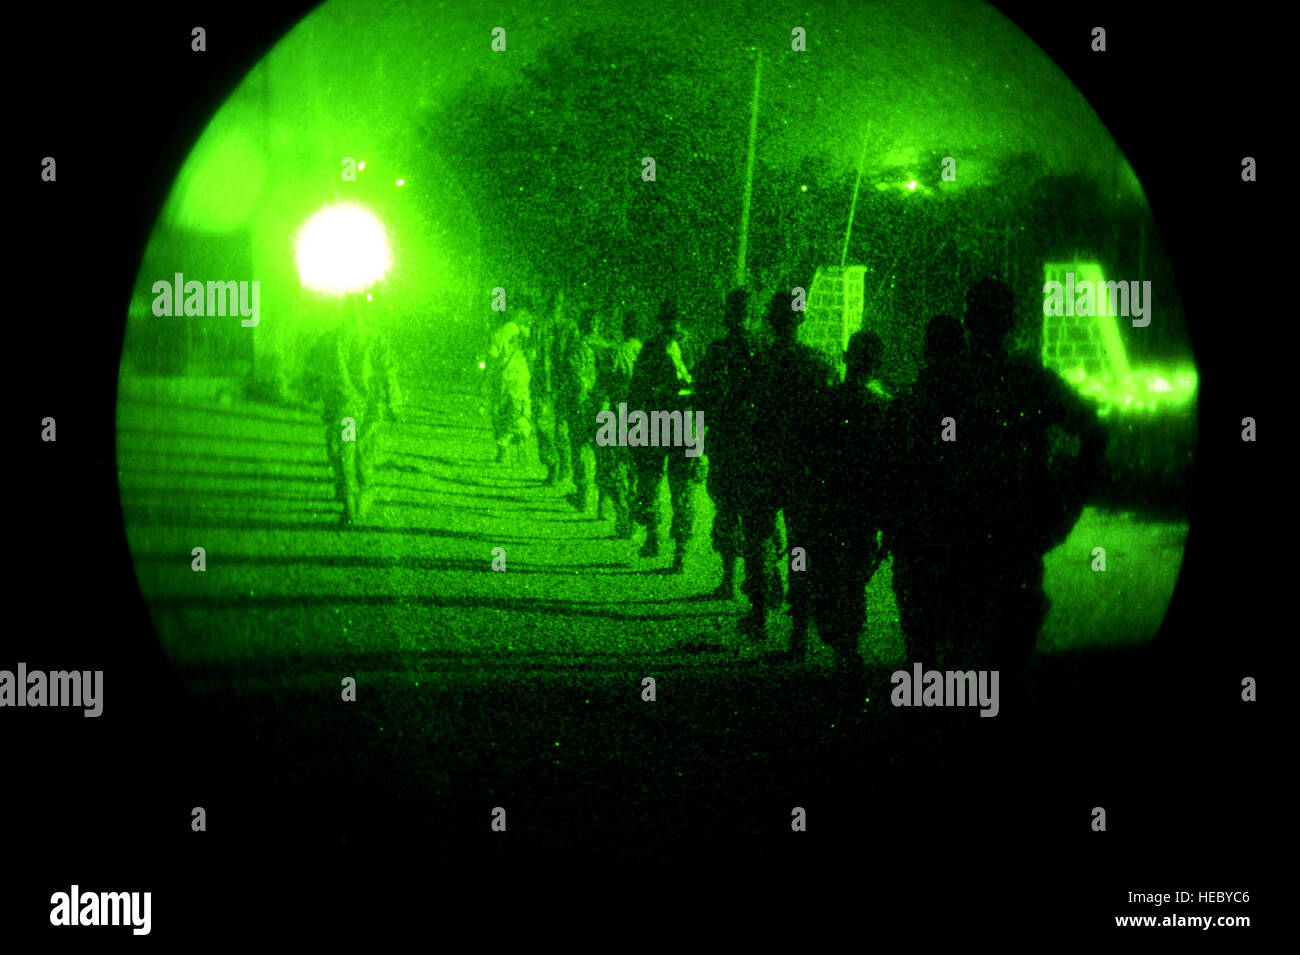 Djiboutian army soldiers walk to their start point during a night vision goggle class in Arta, Djibouti, on March 25, 2012. The U.S. Army's 3rd Squadron, 124th Cavalry Regiment, deployed in support of Combined Joint Task Force - Horn of Africa (CJTF-HOA), is helping train Djiboutian army soldiers for an upcoming deployment to Somalia. Stock Photo